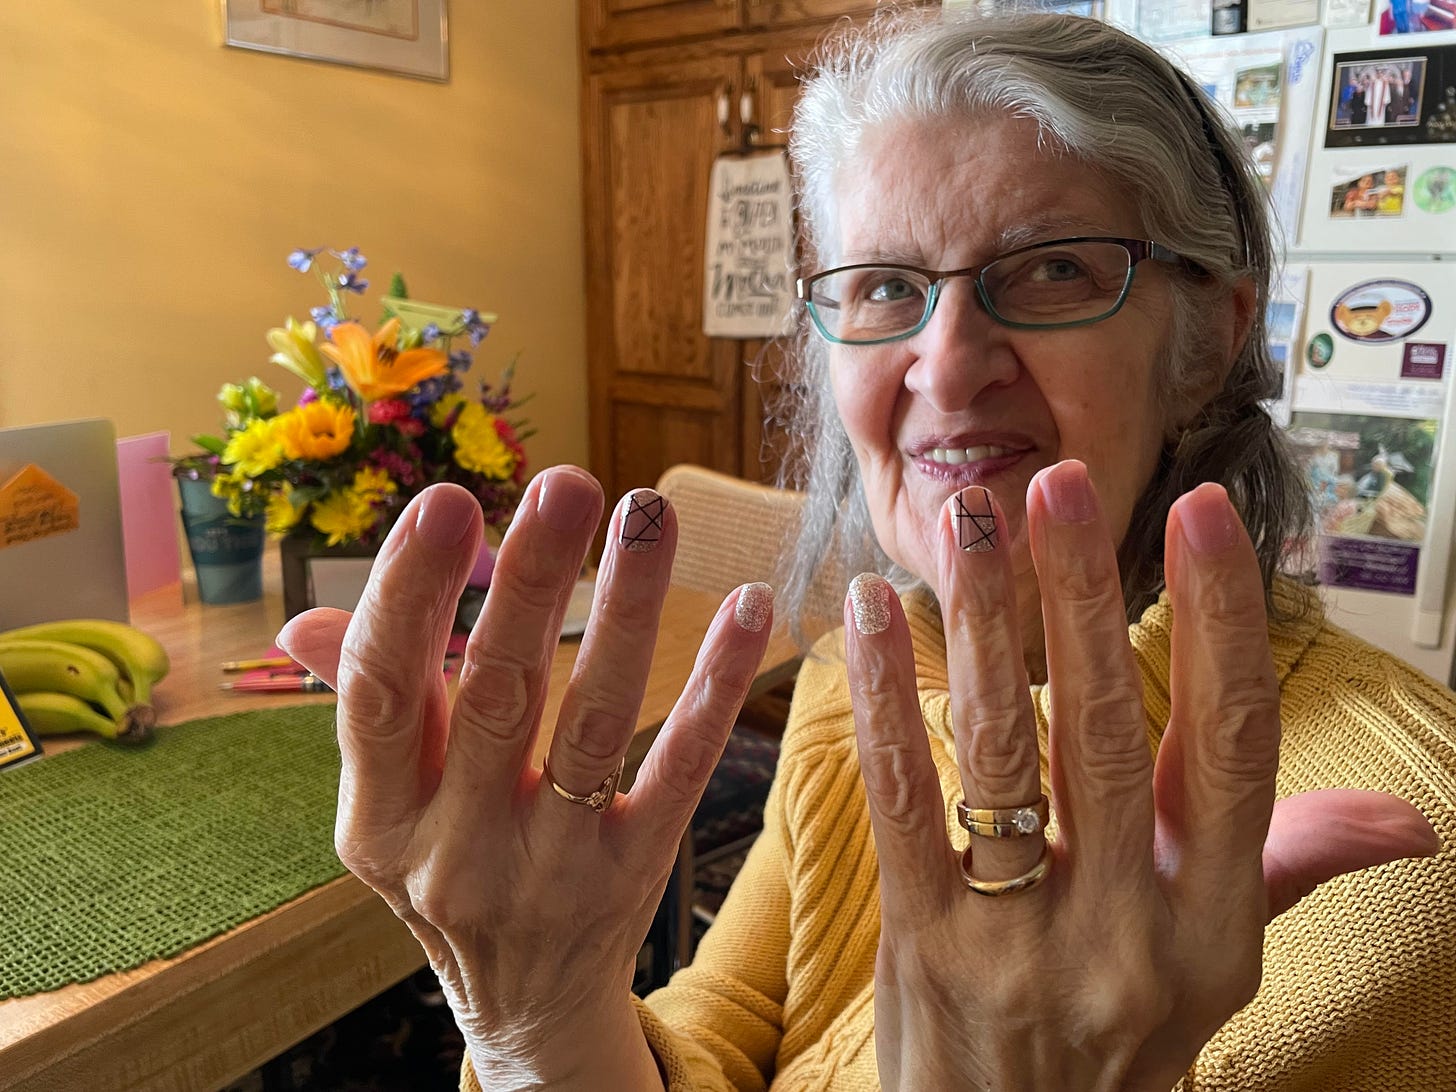 Mom at 80 showing off her freshly manicured fingernails, birthday flowers in the background